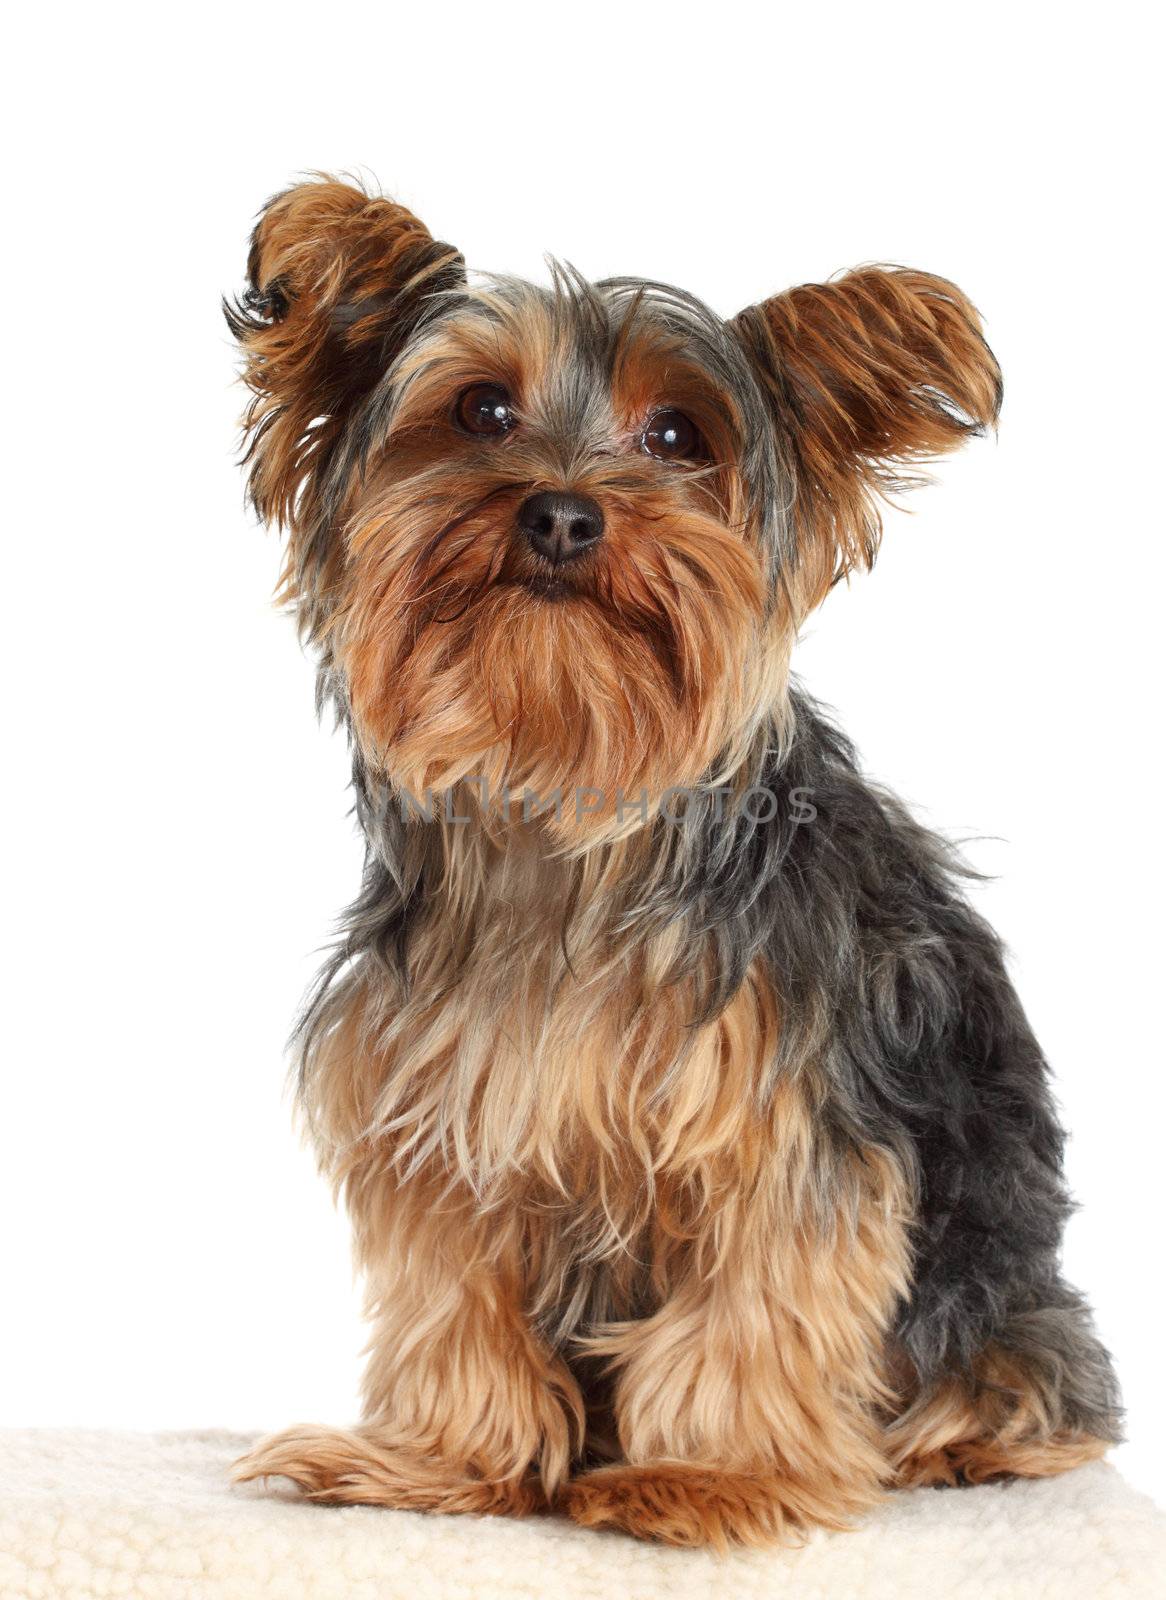 cute little yorkshire terrier dog, isolated on white